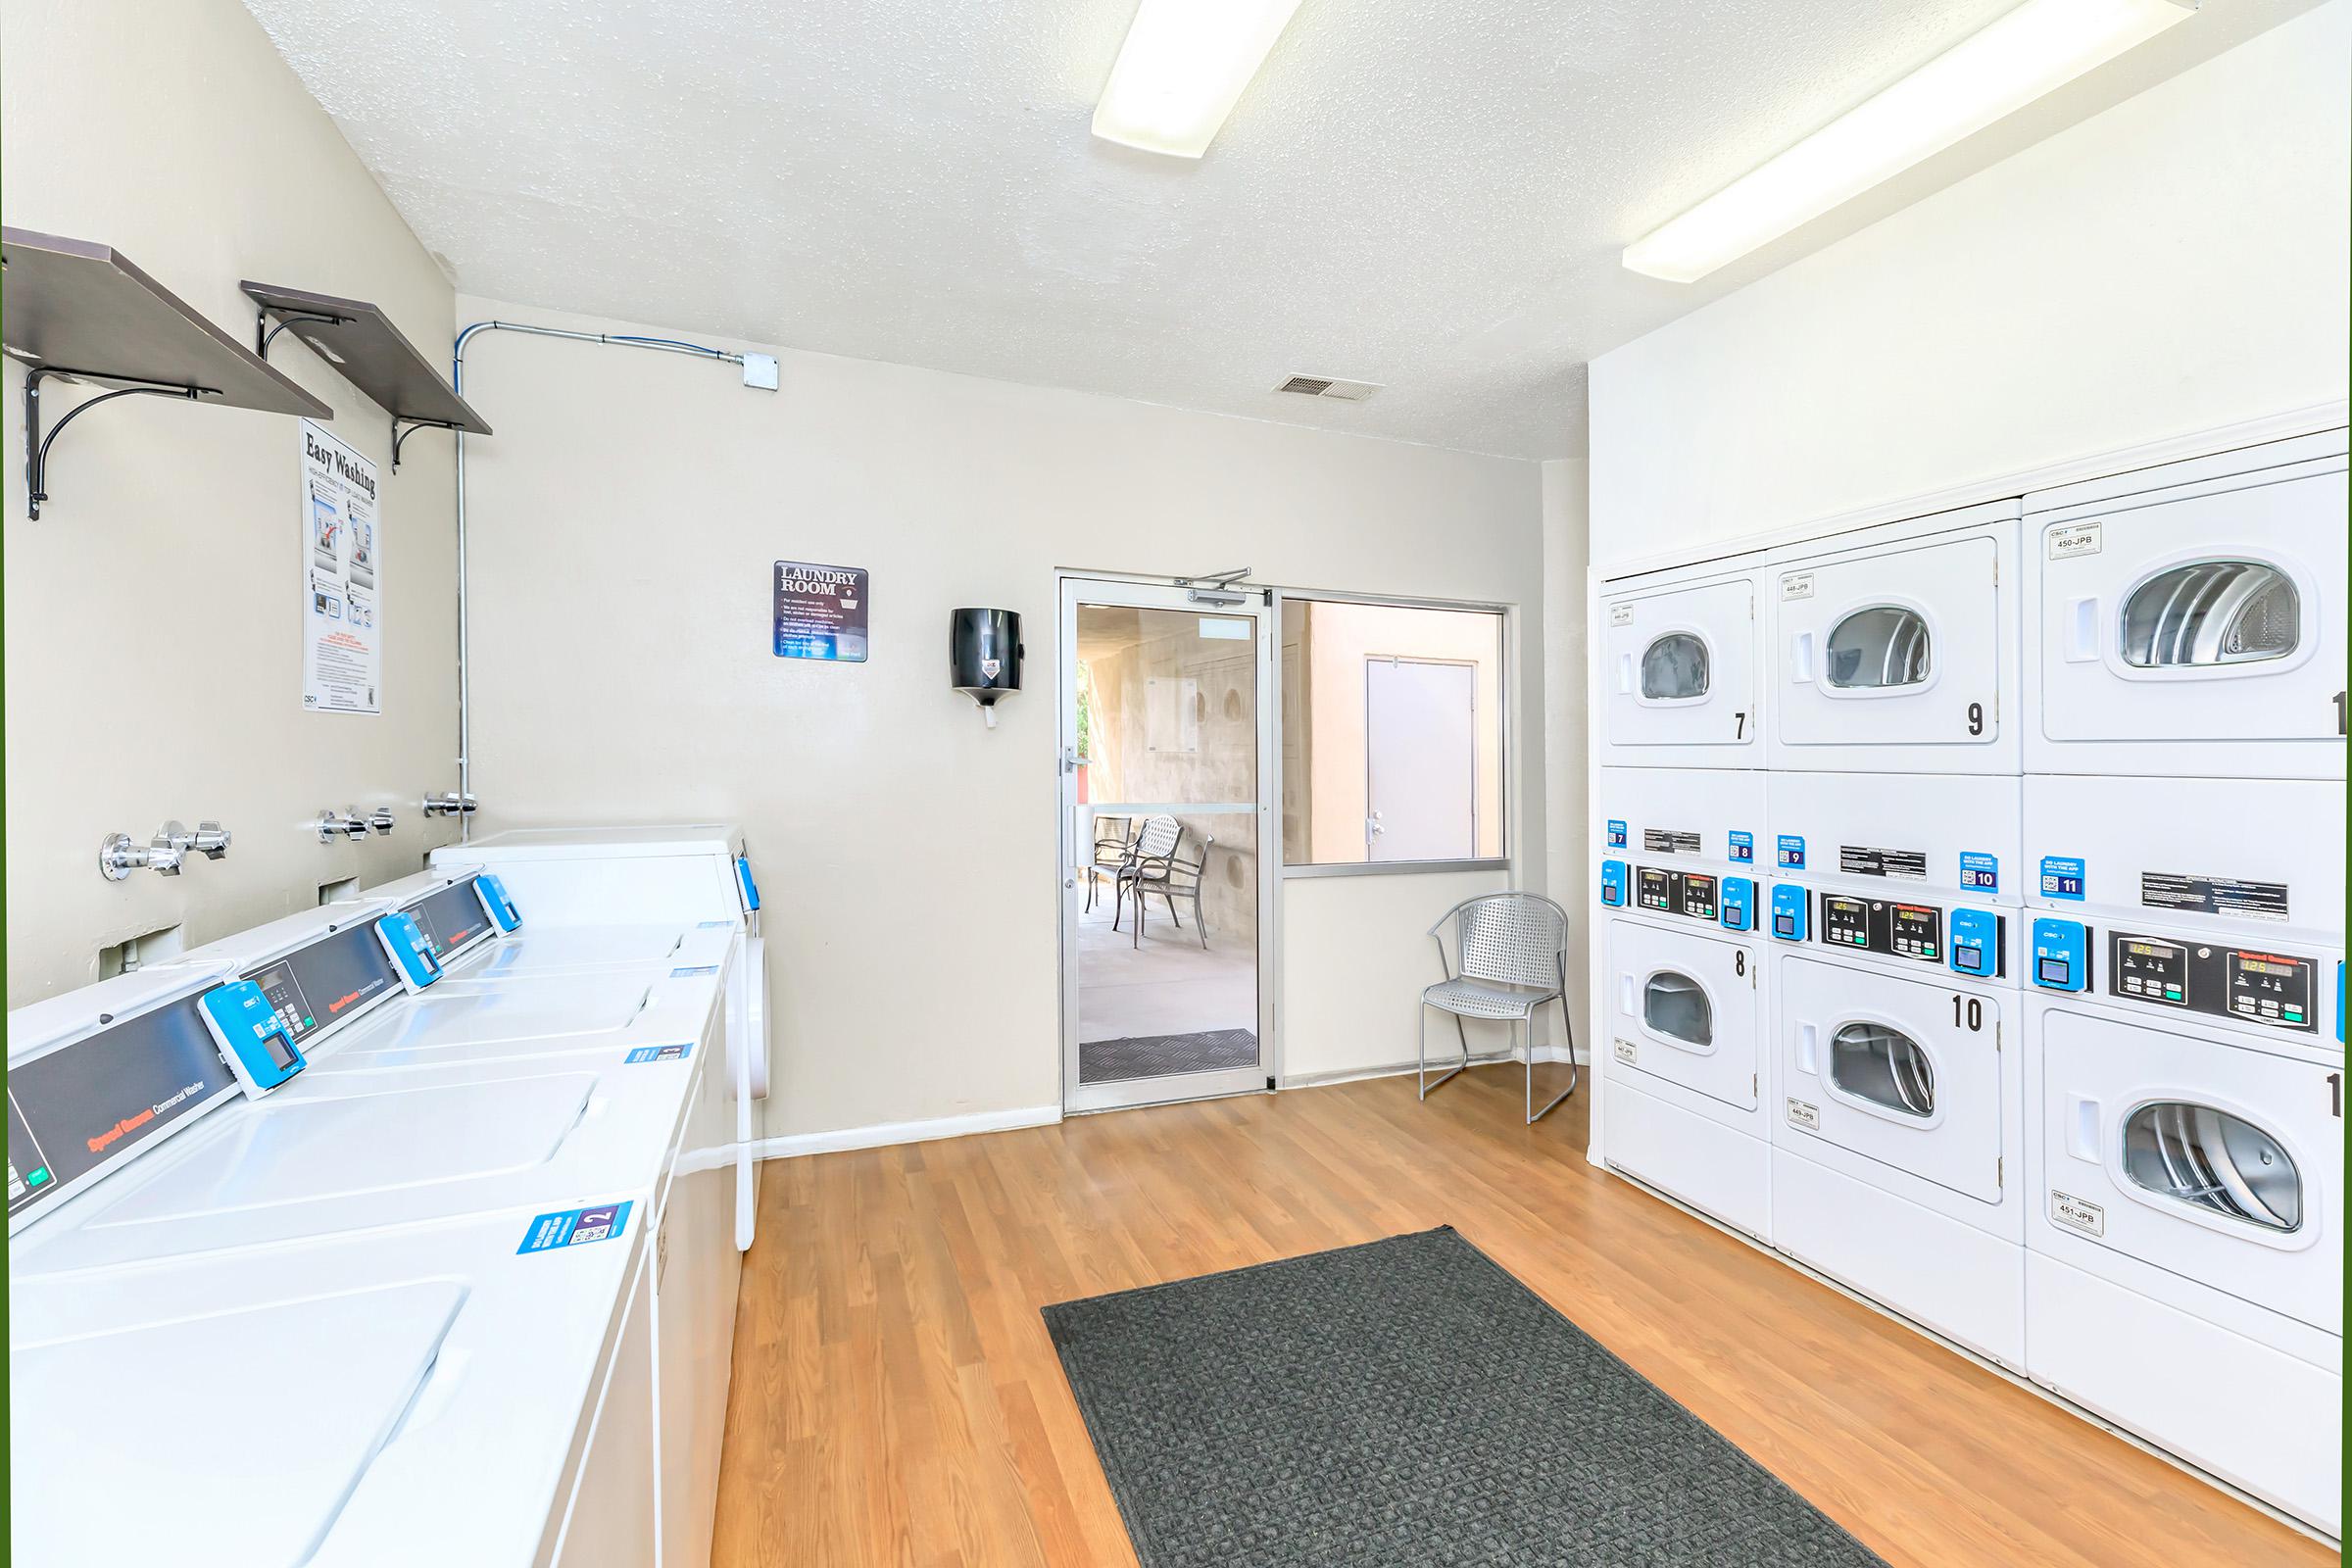 washers and dryers in the laundry room